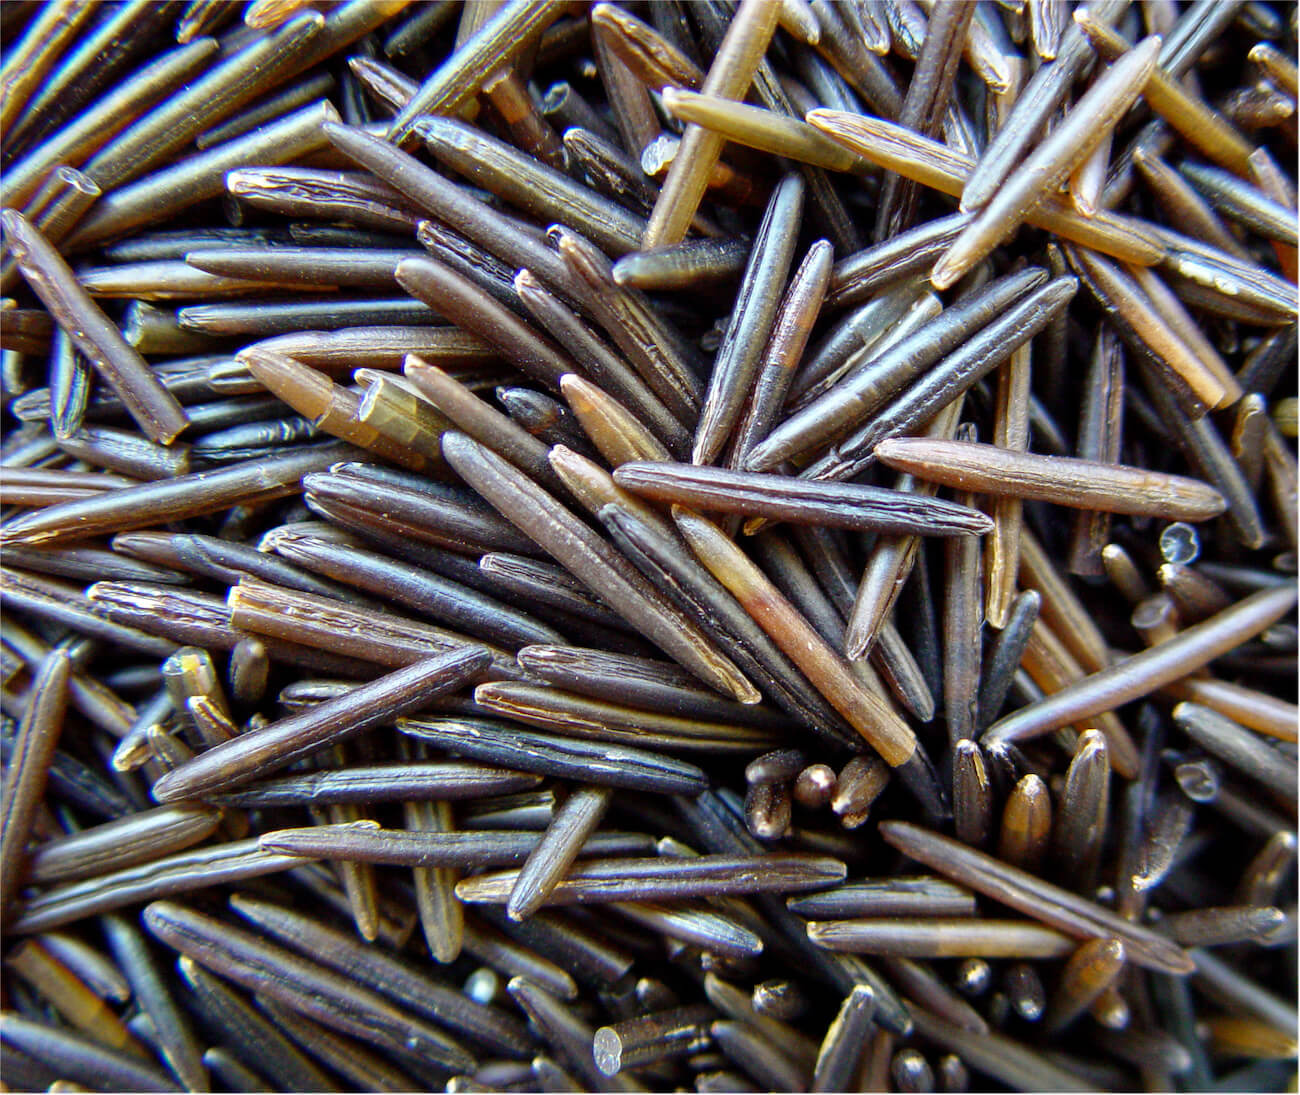 Image shows Indigenous Horticulture (Wild Rice)